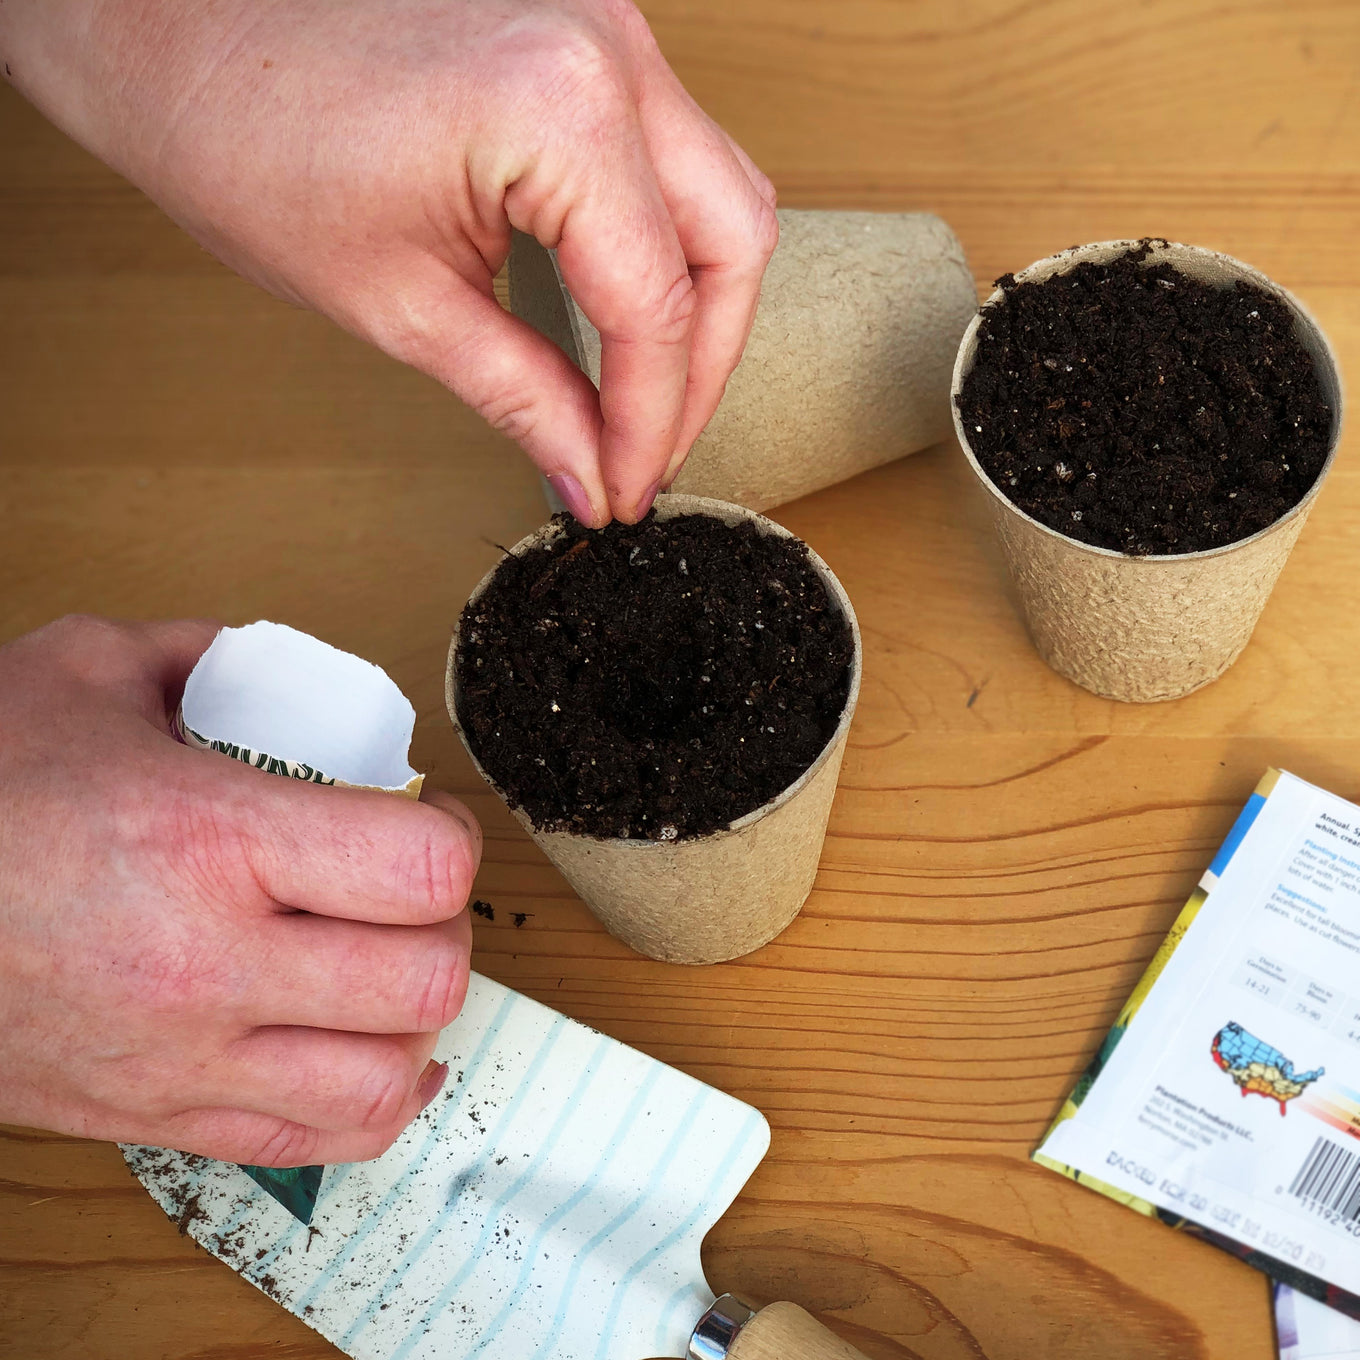 Start your Organic Early Summer Yellow Crookneck Squash seeds in biodegradable peat or paper pots.